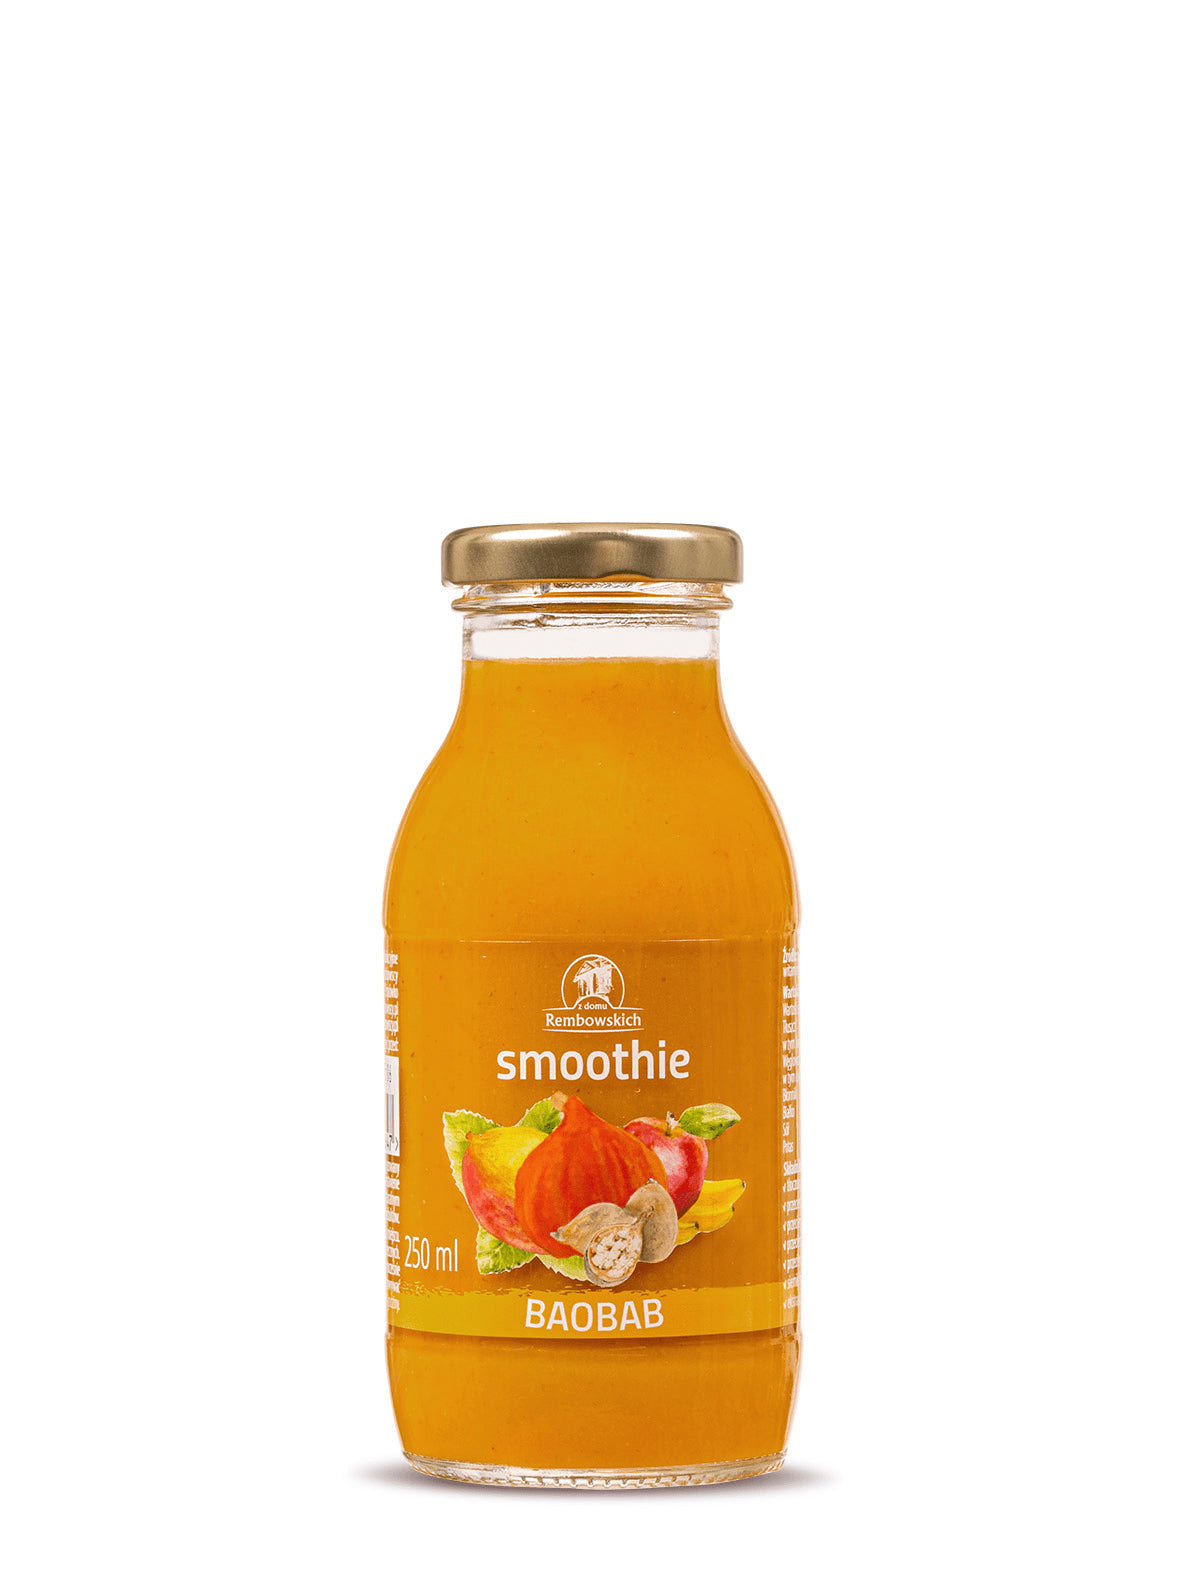 Smoothie with baobab 250ml FROM THE REMBOWSKI HAUS